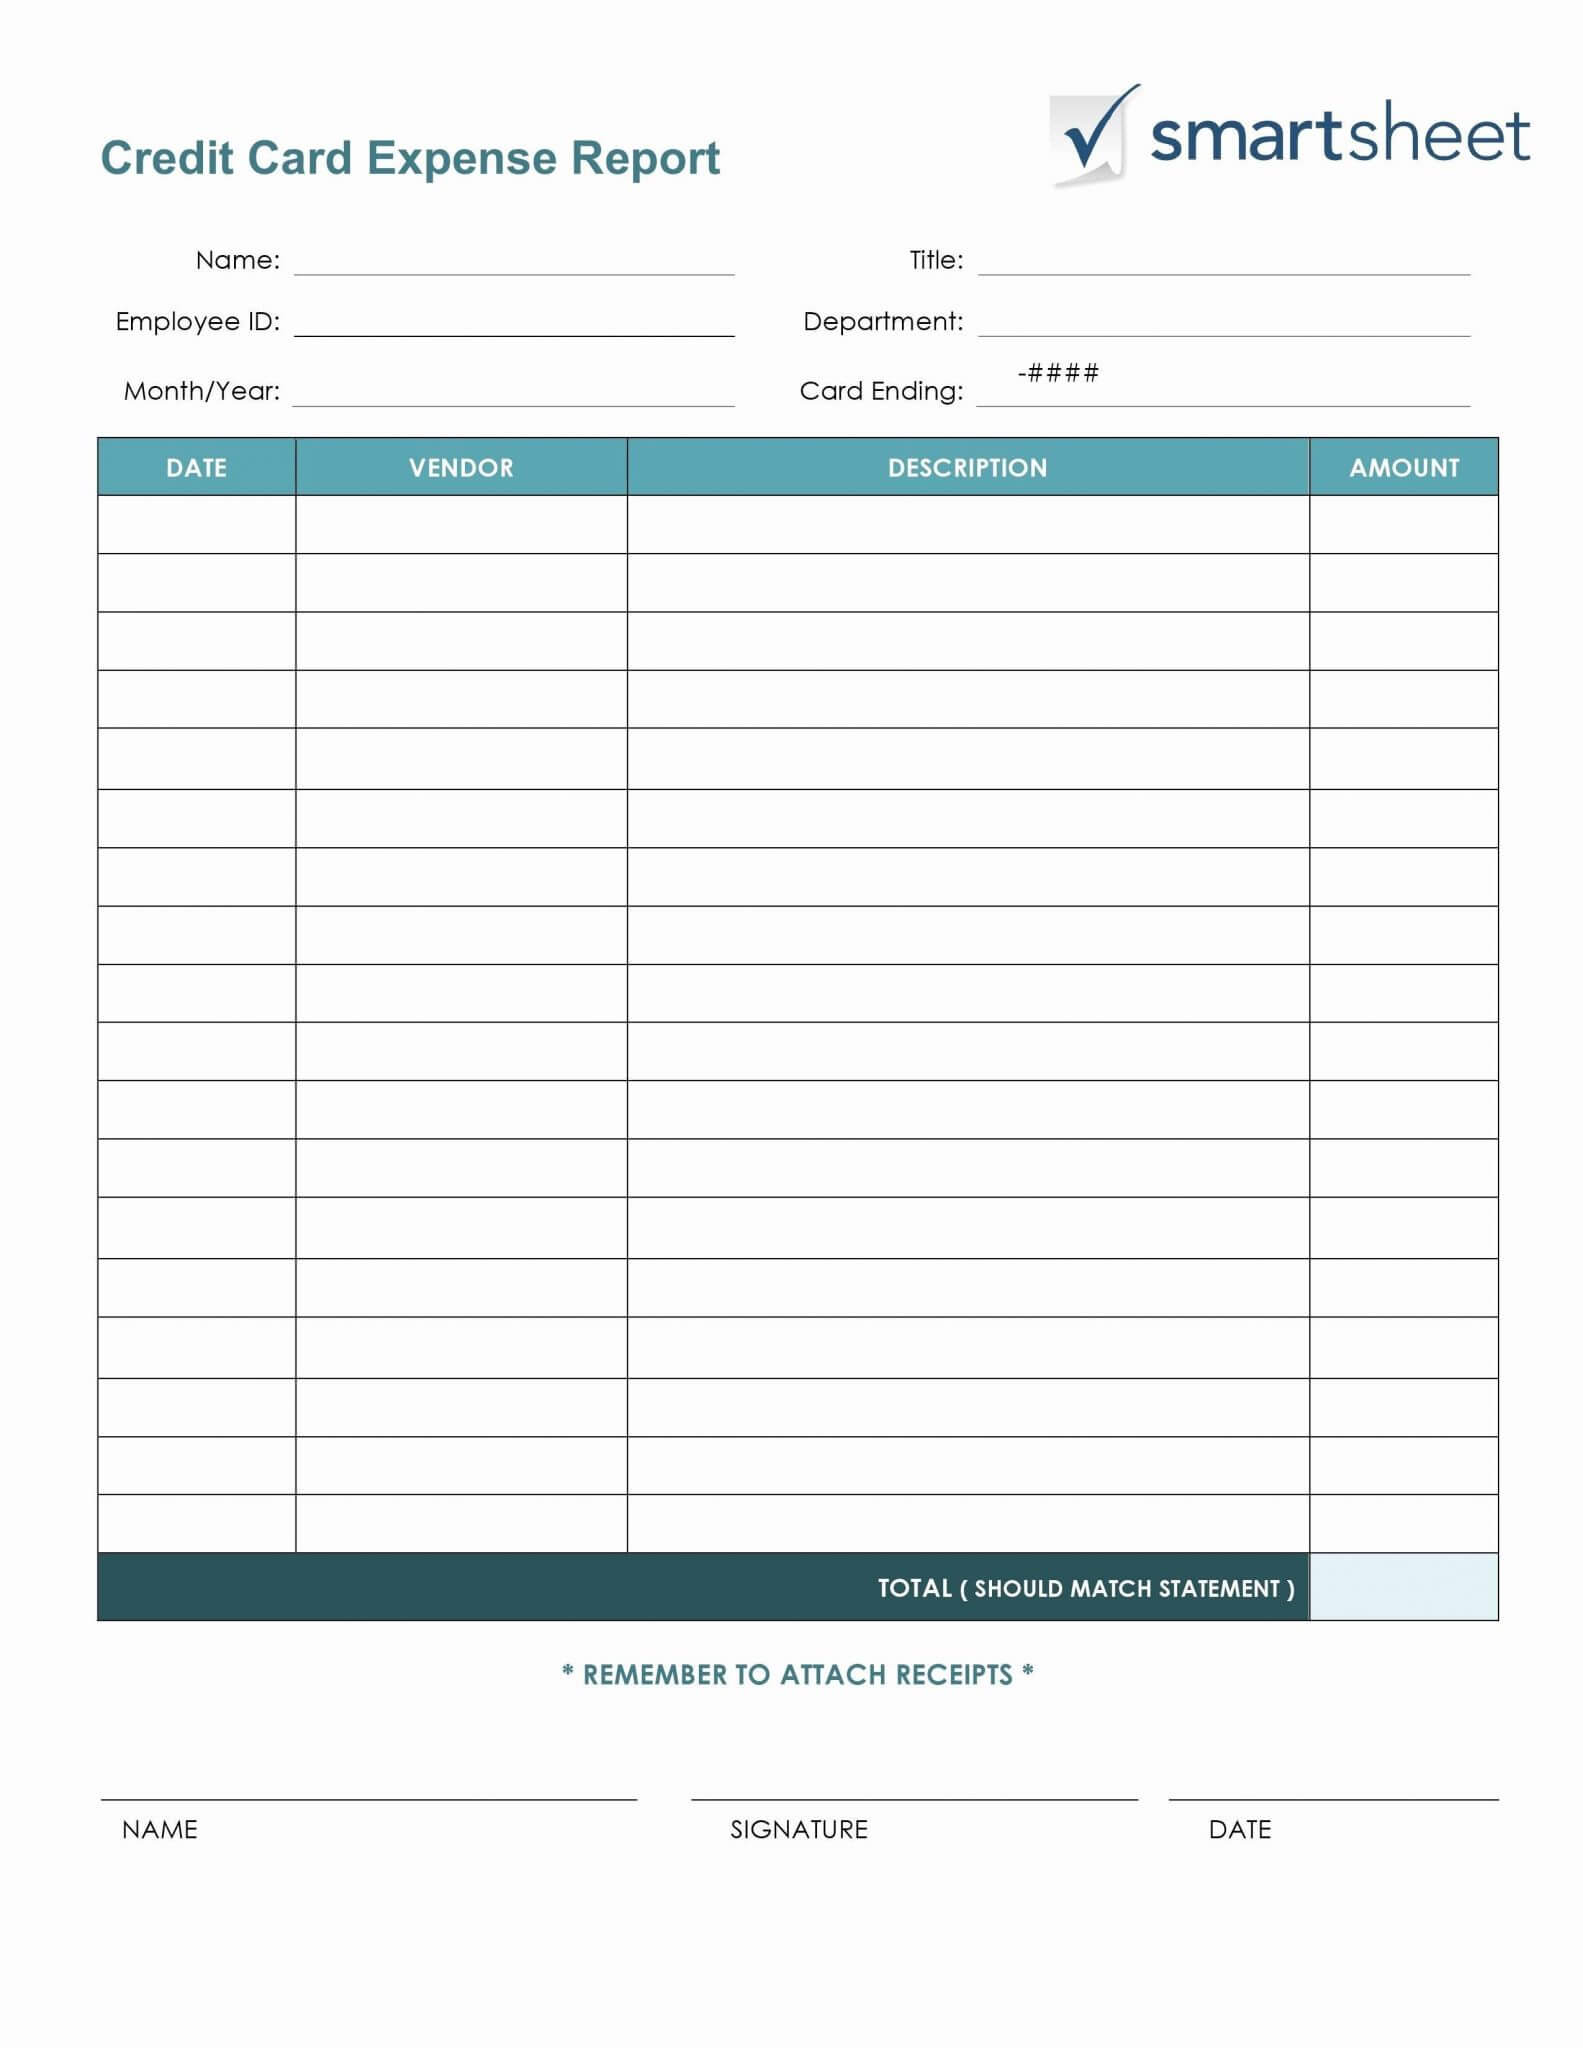 007 Excel Expense Report Template Awful Ideas Best Business Pertaining To Per Diem Expense Report Template